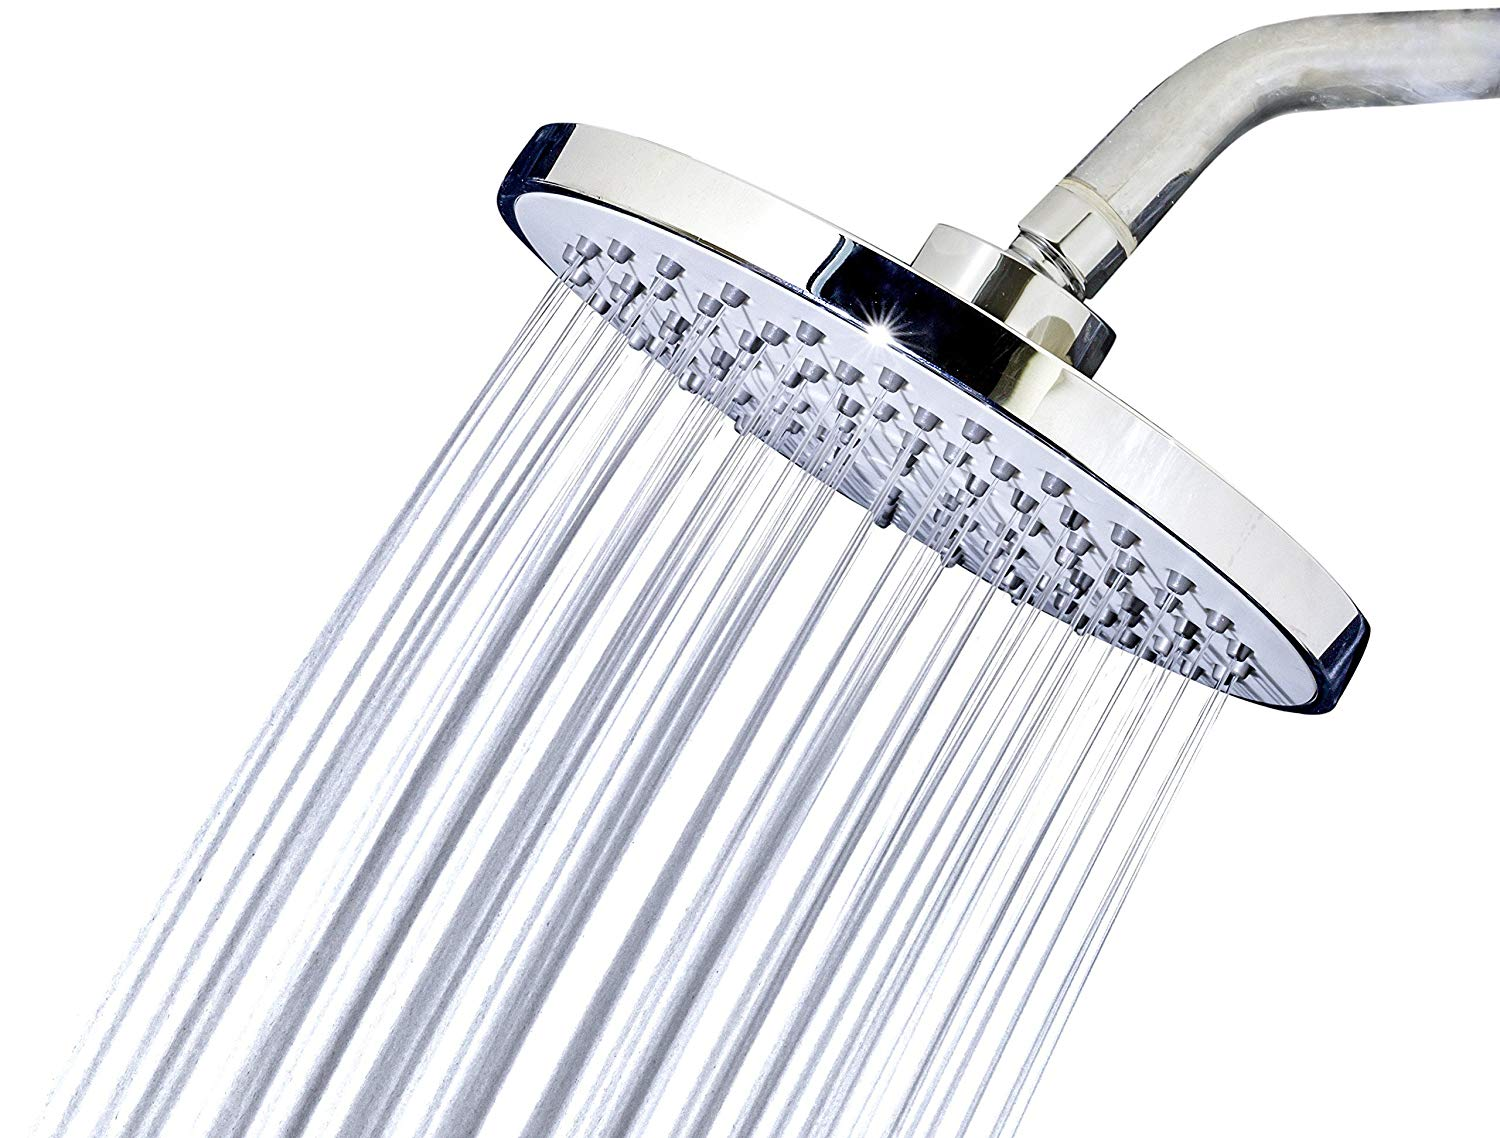 BathSelect Round Stainless Steel Wall Mount Rainfall Shower Head In Chrome Finish